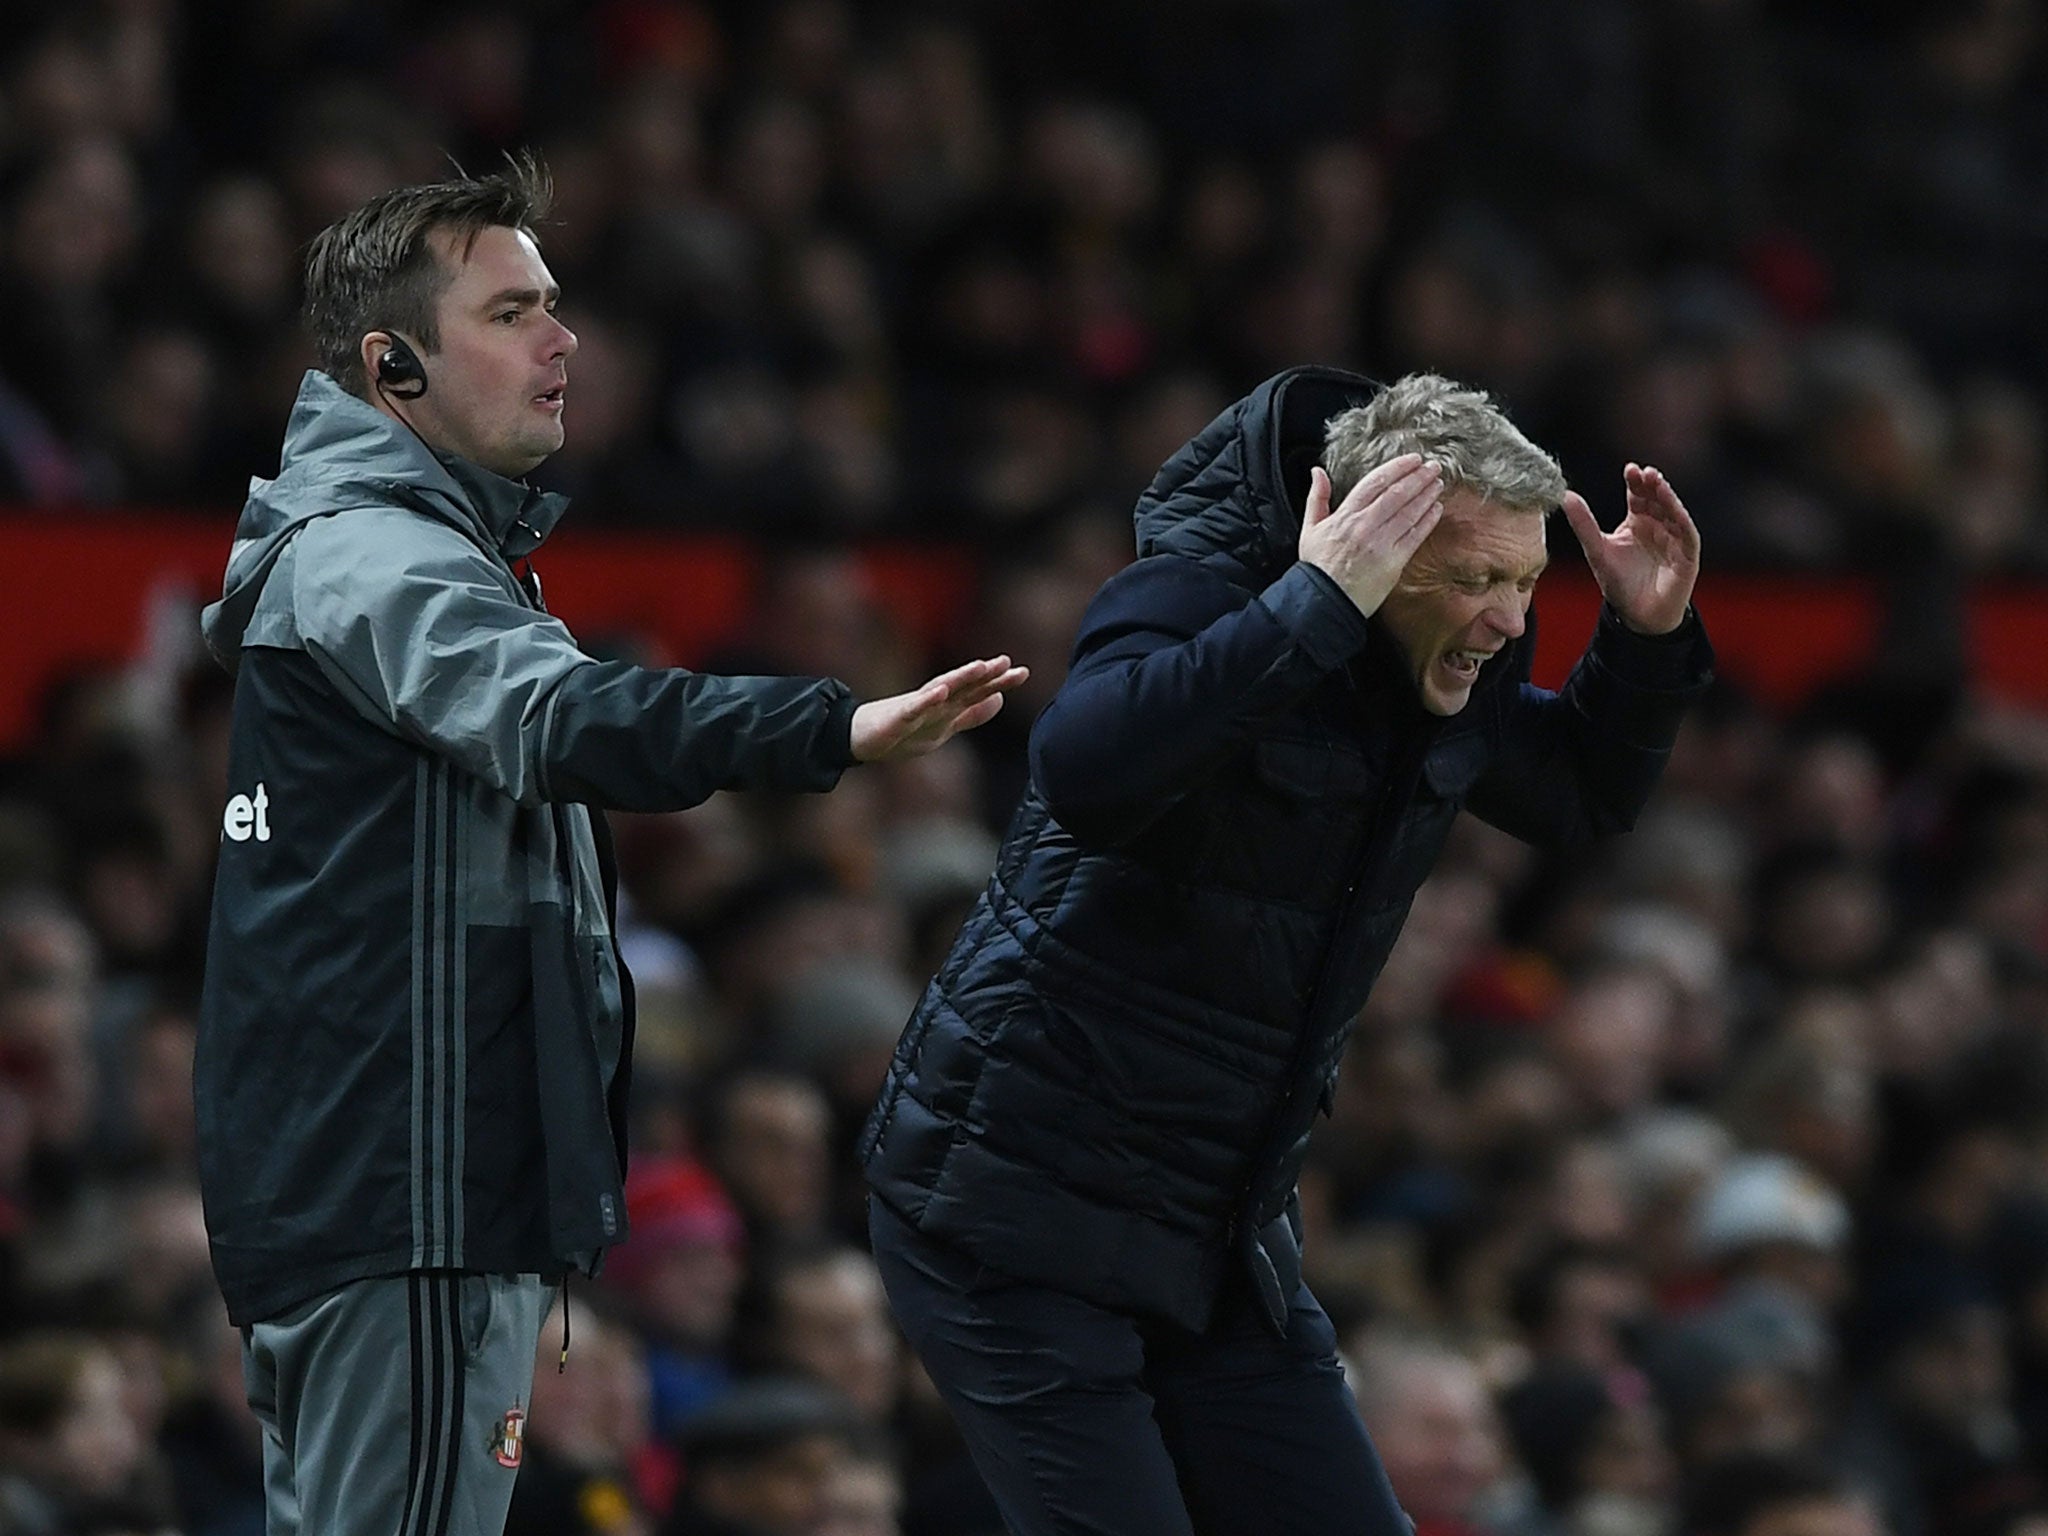 Moyes cut a frustrated figure on the touchline